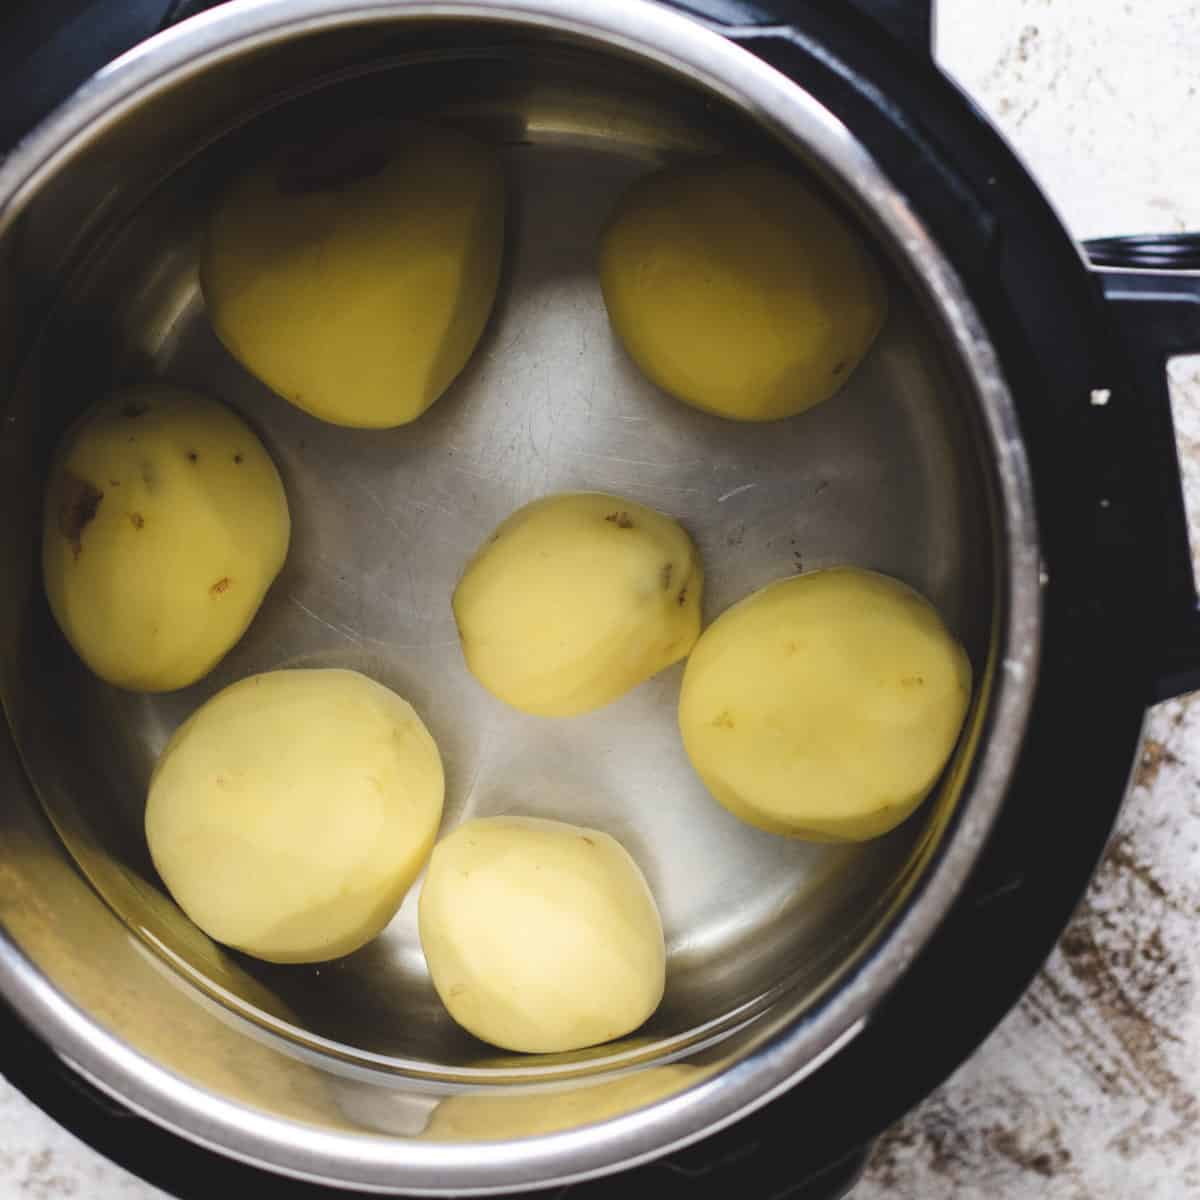 Peeled potatoes in an Instant Pot.